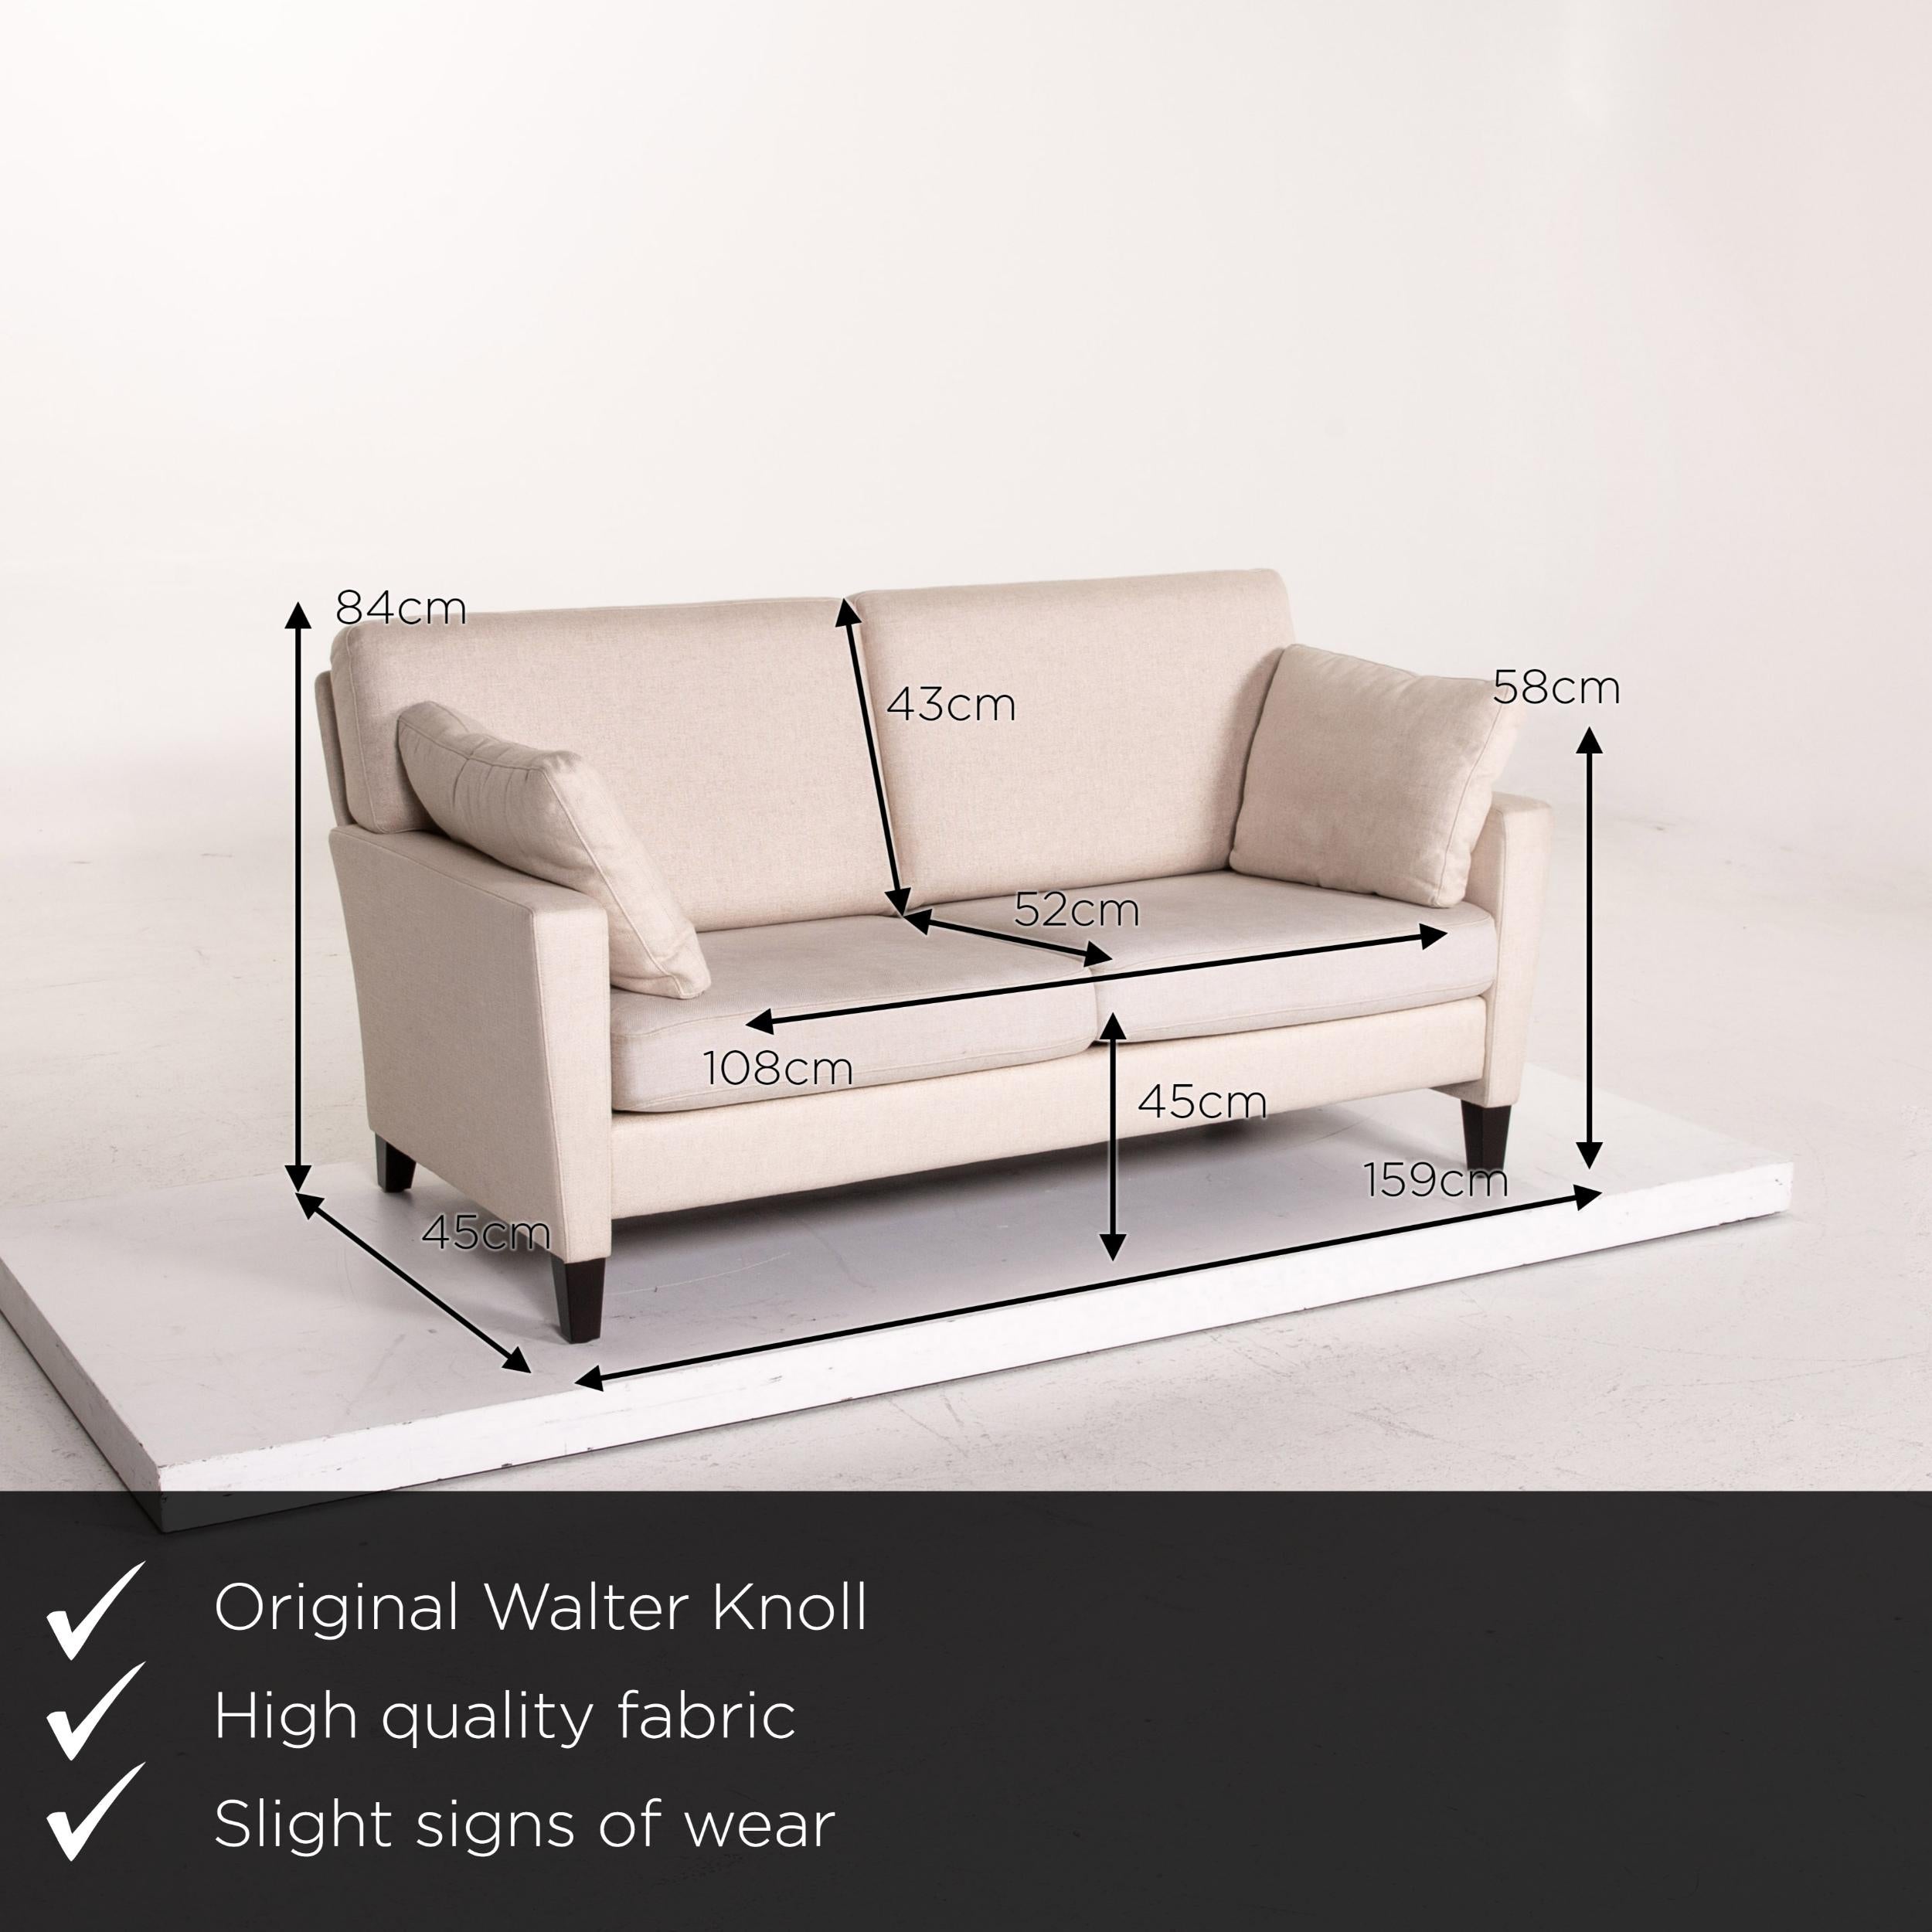 We present to you a Walter Knoll Henry fabric sofa cream two-seat couch.
 
 

 Product measurements in centimeters:
 

Depth 84
Width 159
Height 84
Seat height 45
Rest height 58
Seat depth 52
Seat width 108
Back height 43.
  